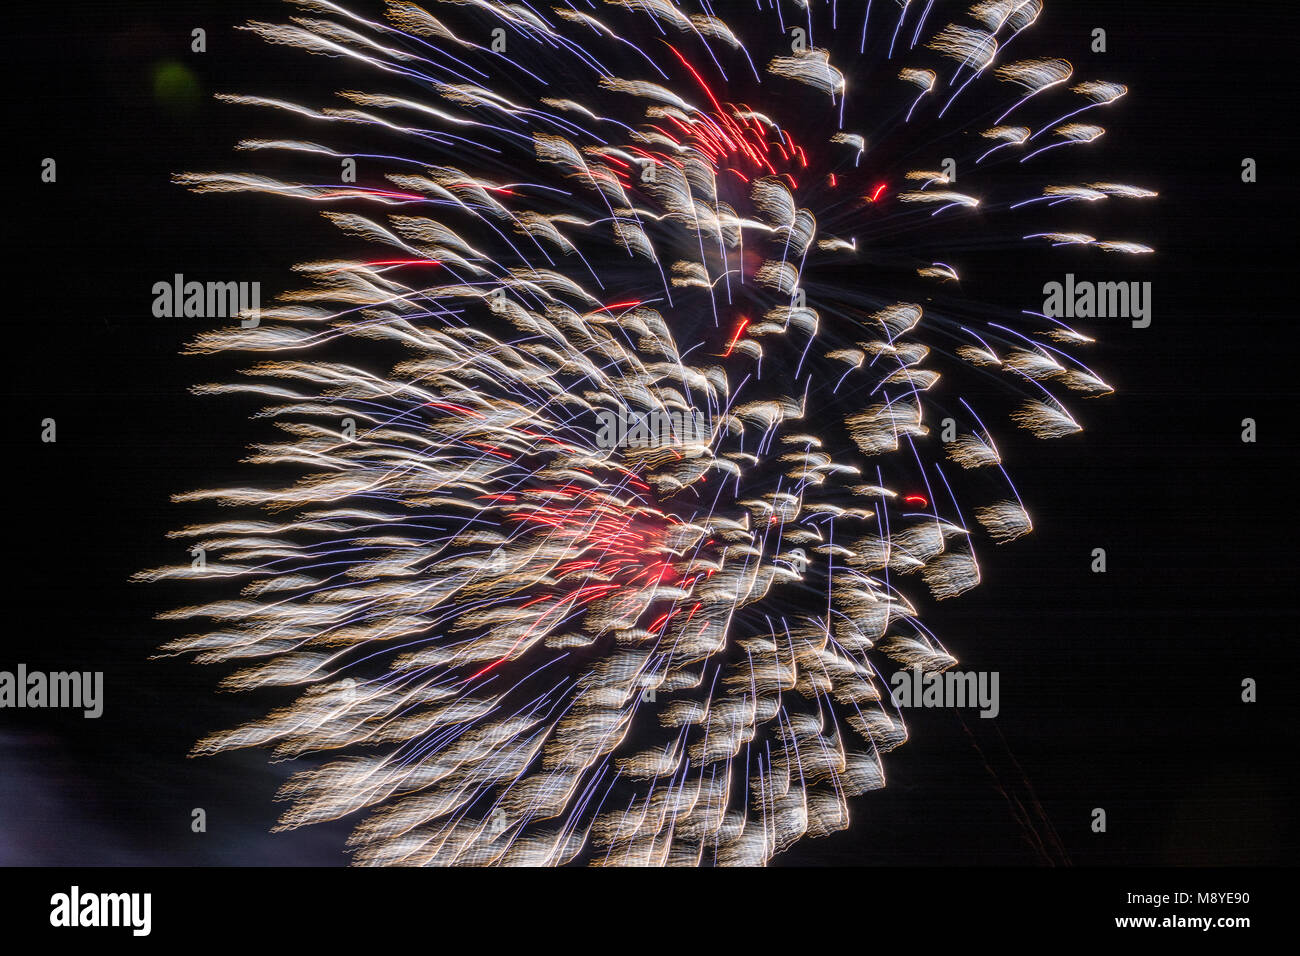 Colorful Fireworks Display Stock Photo